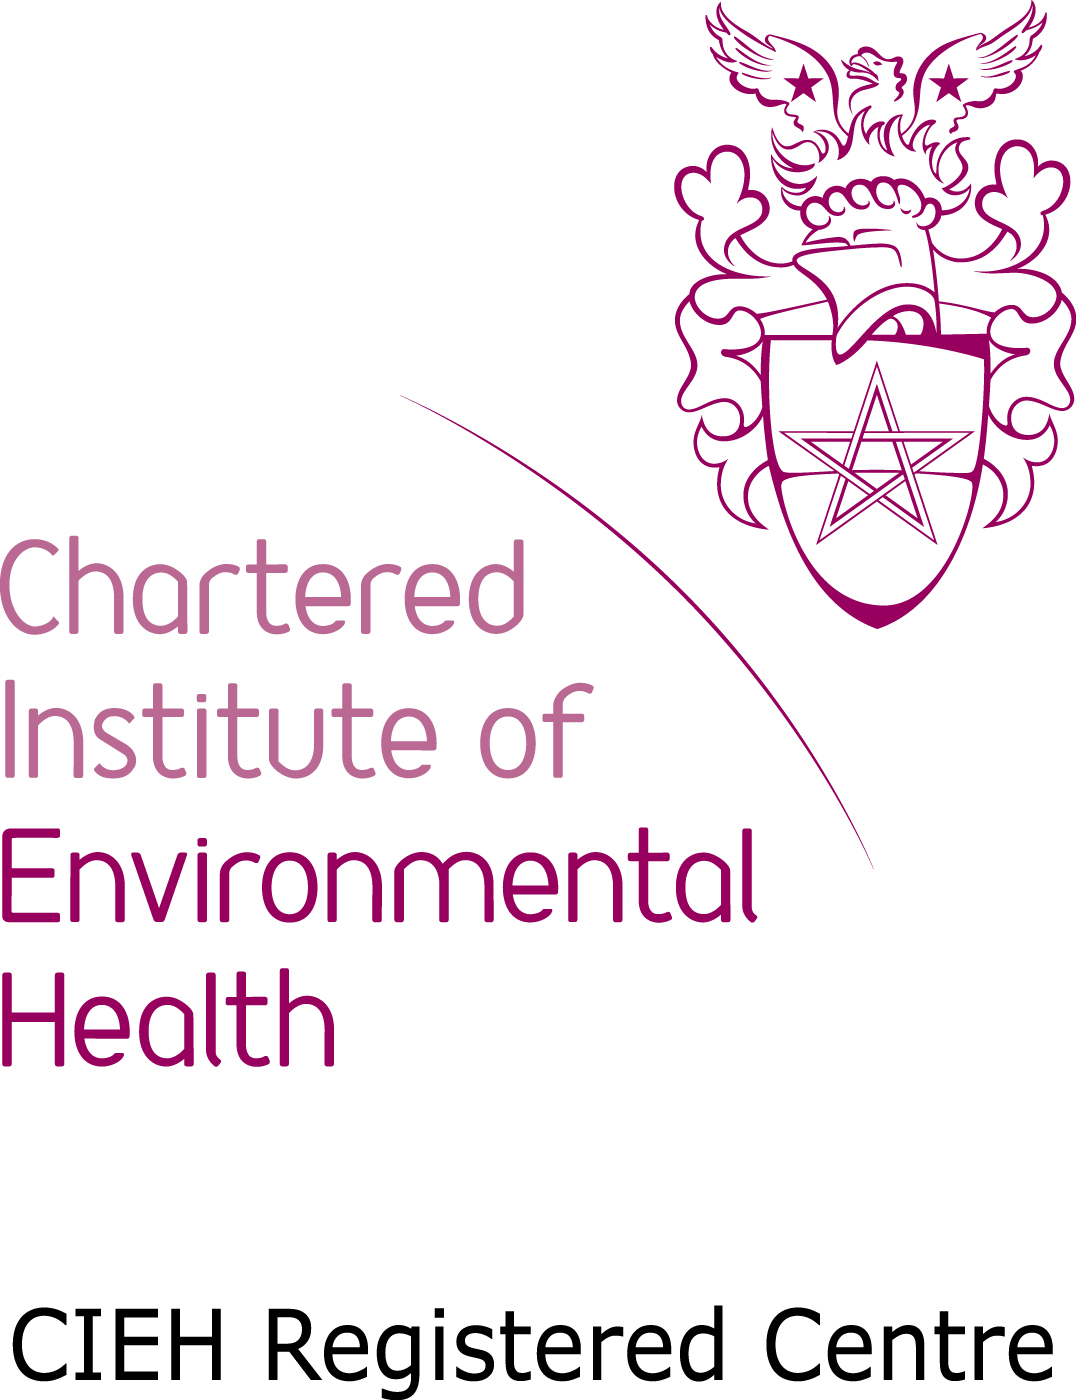 The Chartered Institute of Environmental Health